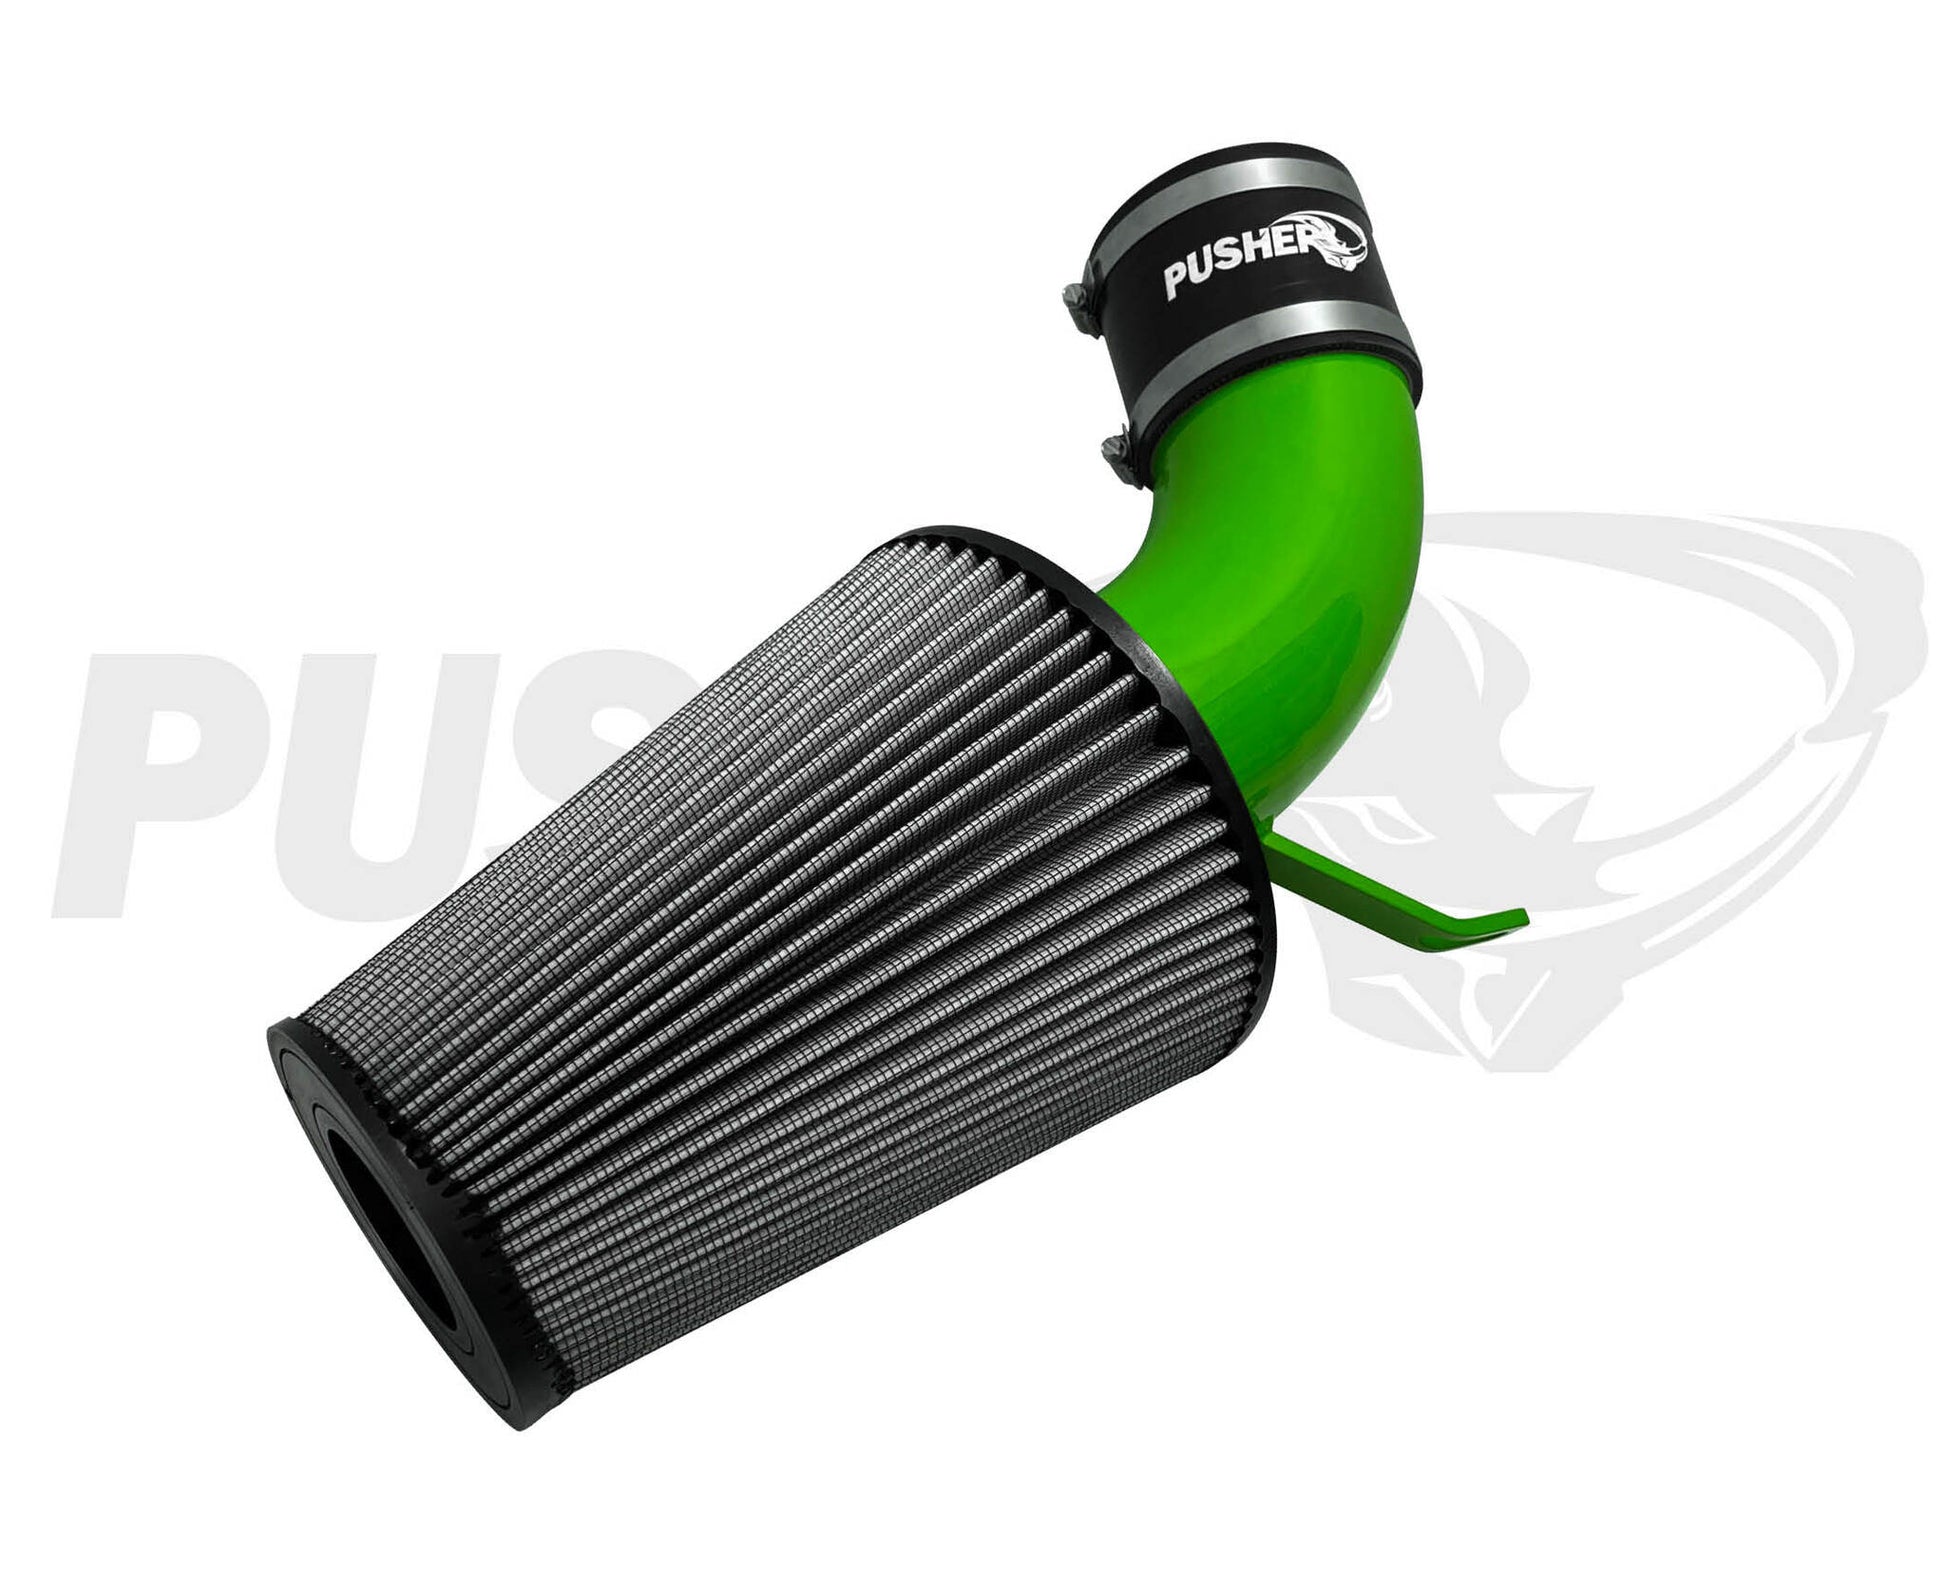 PDC9193CAI_U PDC9193CAI_W PDC9193CAI_R PDC9193CAI_K PDC9193CAI PDC9193CAI_G PDC9193CAI_N  Pusher Front Mount Cold Air Intake System for 1991-1993 Intercooled Dodge Cummins Hell On Wheels Ltd Canada